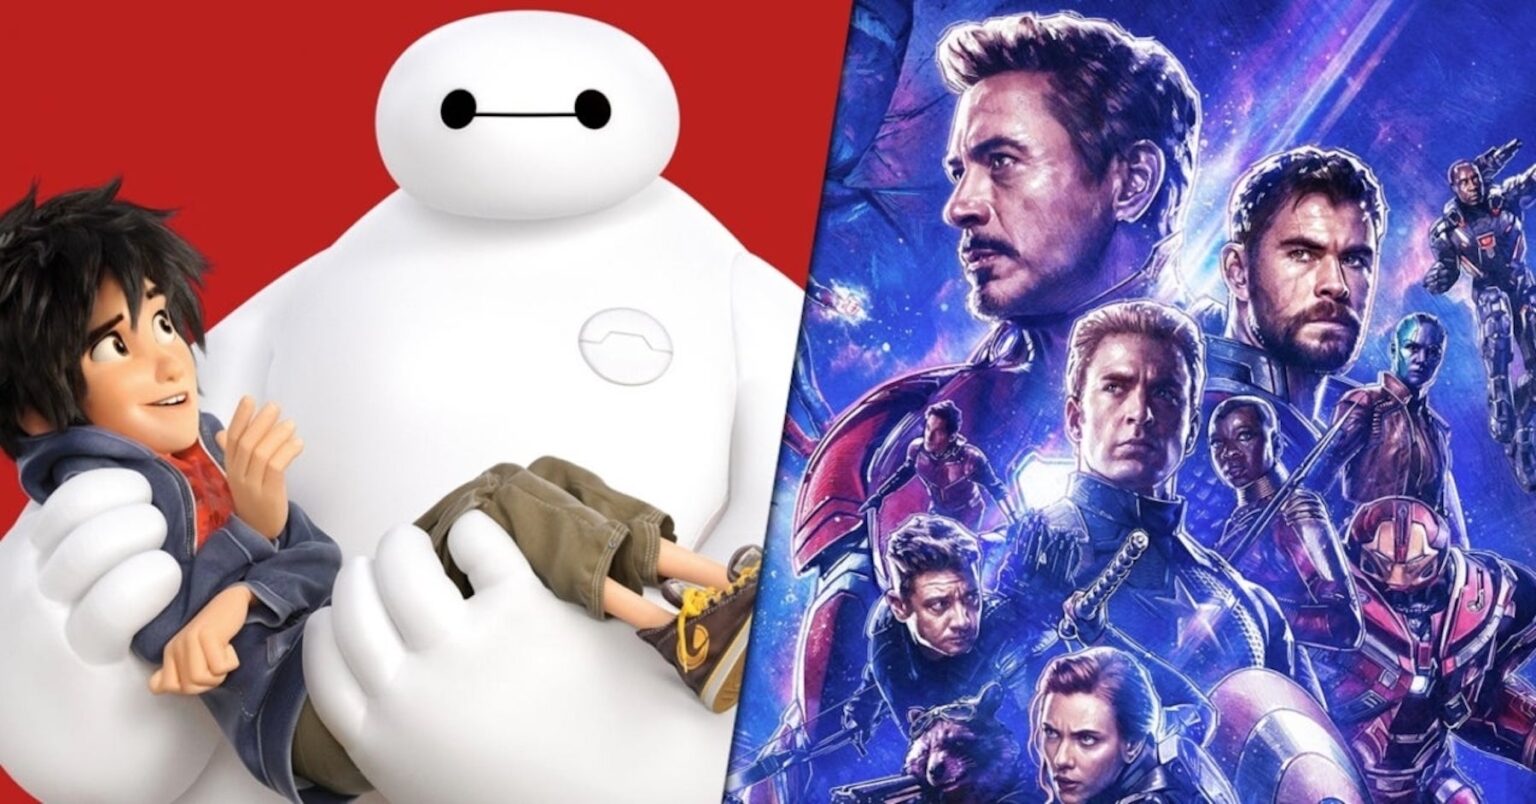 Will the characters from 'Big Hero 6' ever come to the MCU? Read on to learn how we think it could happen.